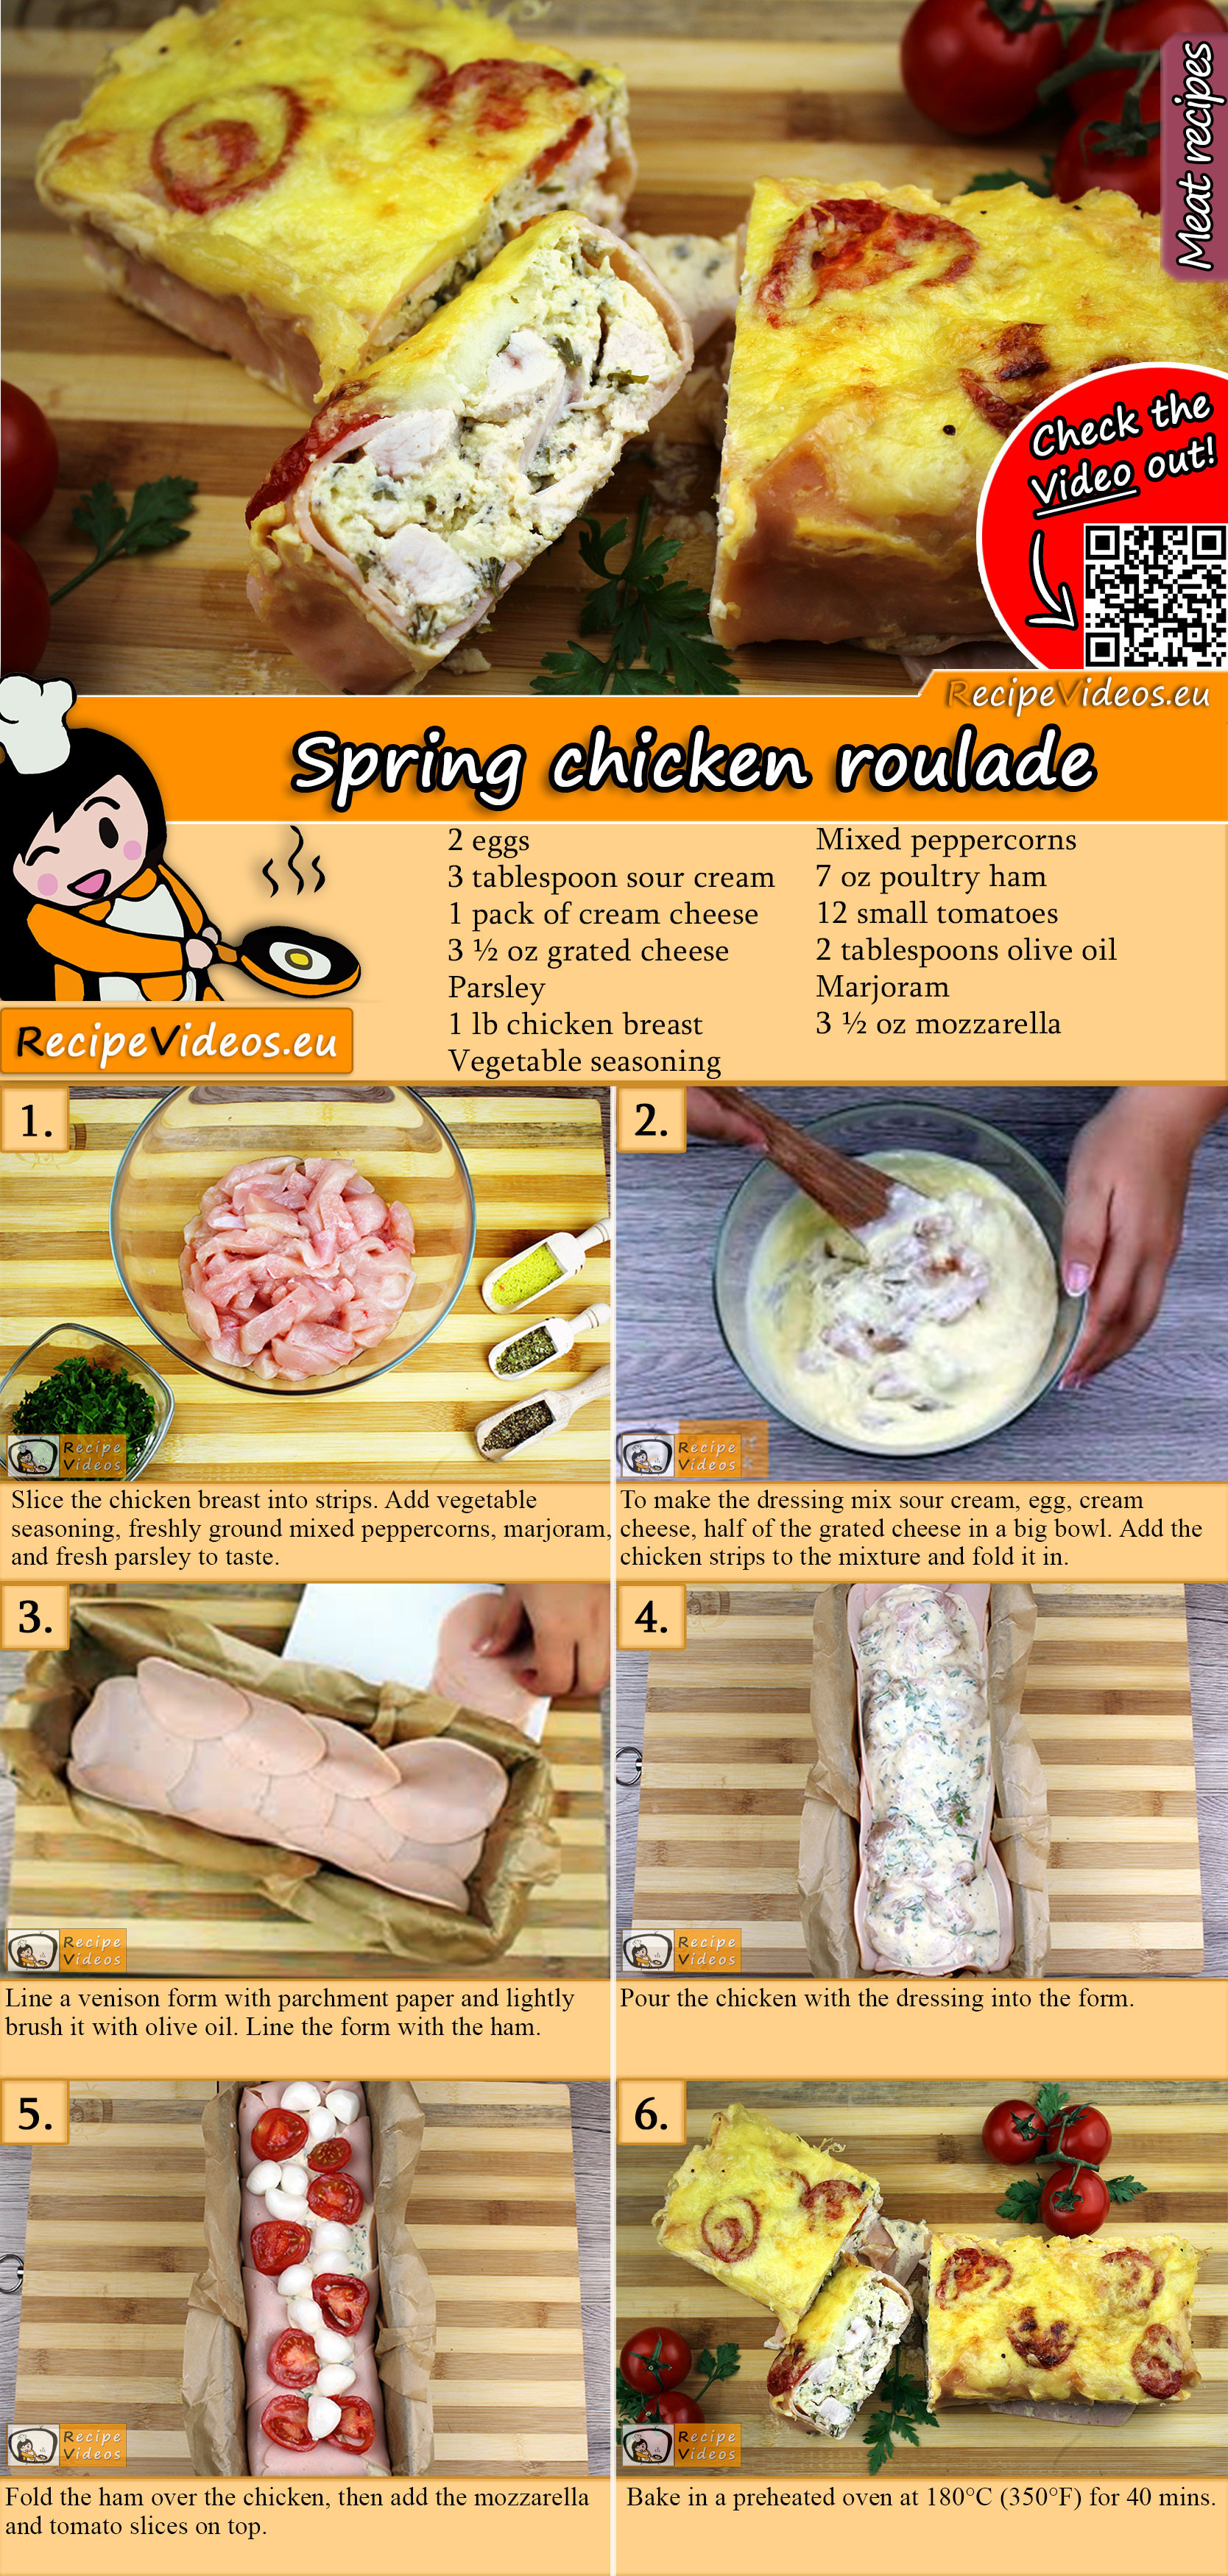 Spring chicken roulade recipe with video